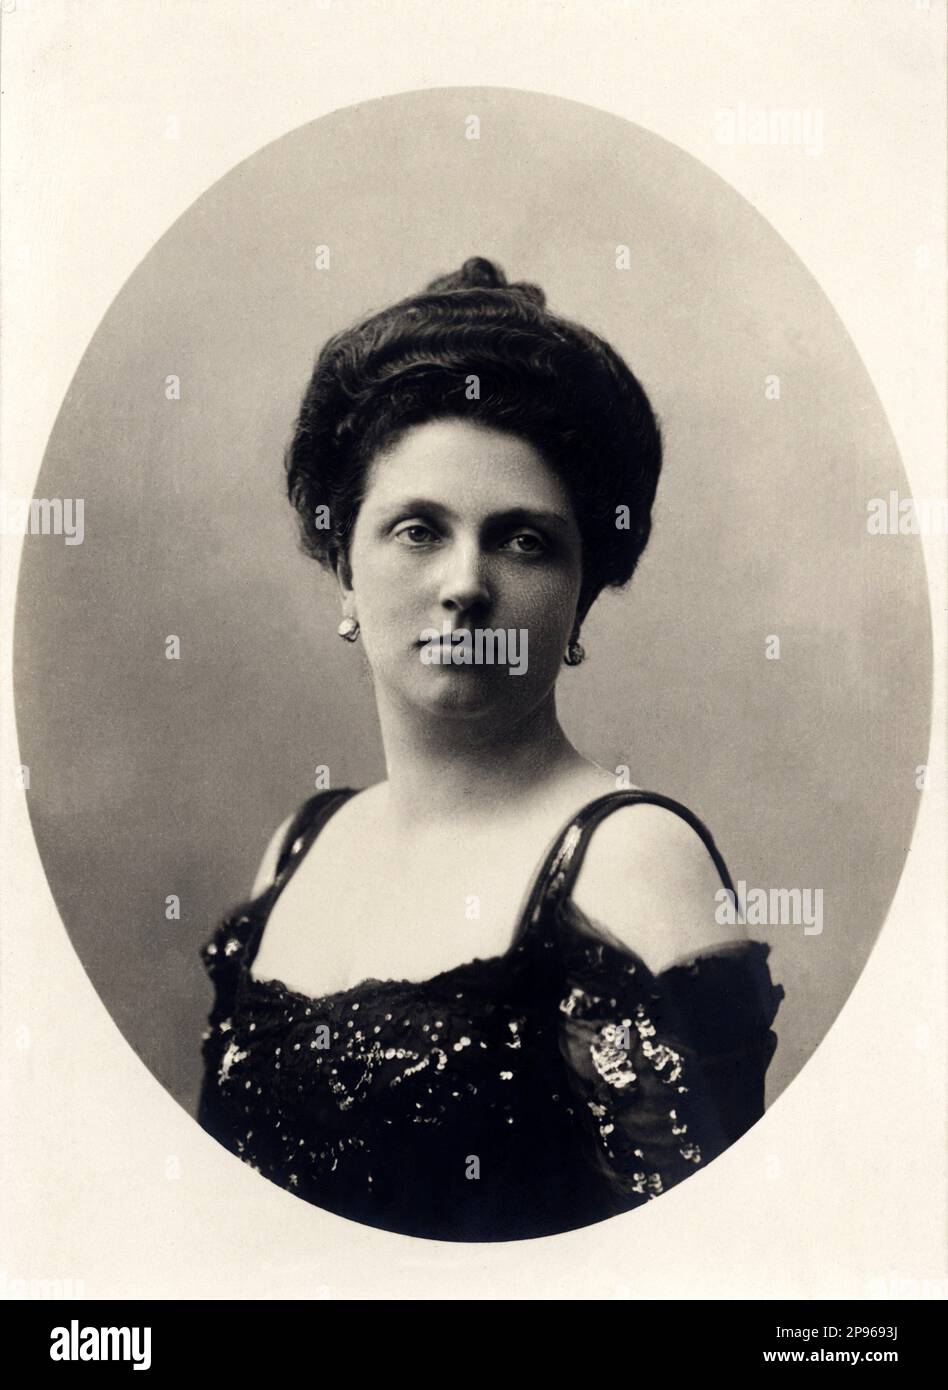 1902  : The scandalous Kronprinzessin zu Sachsen  LUISA VON TOSCANA ( Luise , Louise von Österreich - Toskana  , Salzburg 1870 – Bruxelles 1947 ). Married with Friedrich August III von Sachsen ( Frederick Augustus ,1865 - 1932), with him have 7 sons. Princess Imperial and Archduchess of Austria, Princess of Tuscany, Hungary and Bohemia was a daughter of Ferdinand IV of Tuscany and his second wife Alicia of Parma, daughter of Duke Charles III and Louise of Berry. She didn't follow etiquette at the court, which resulted in arguments with her father-in-law. On 9 December 1902 she left Saxony with Stock Photo